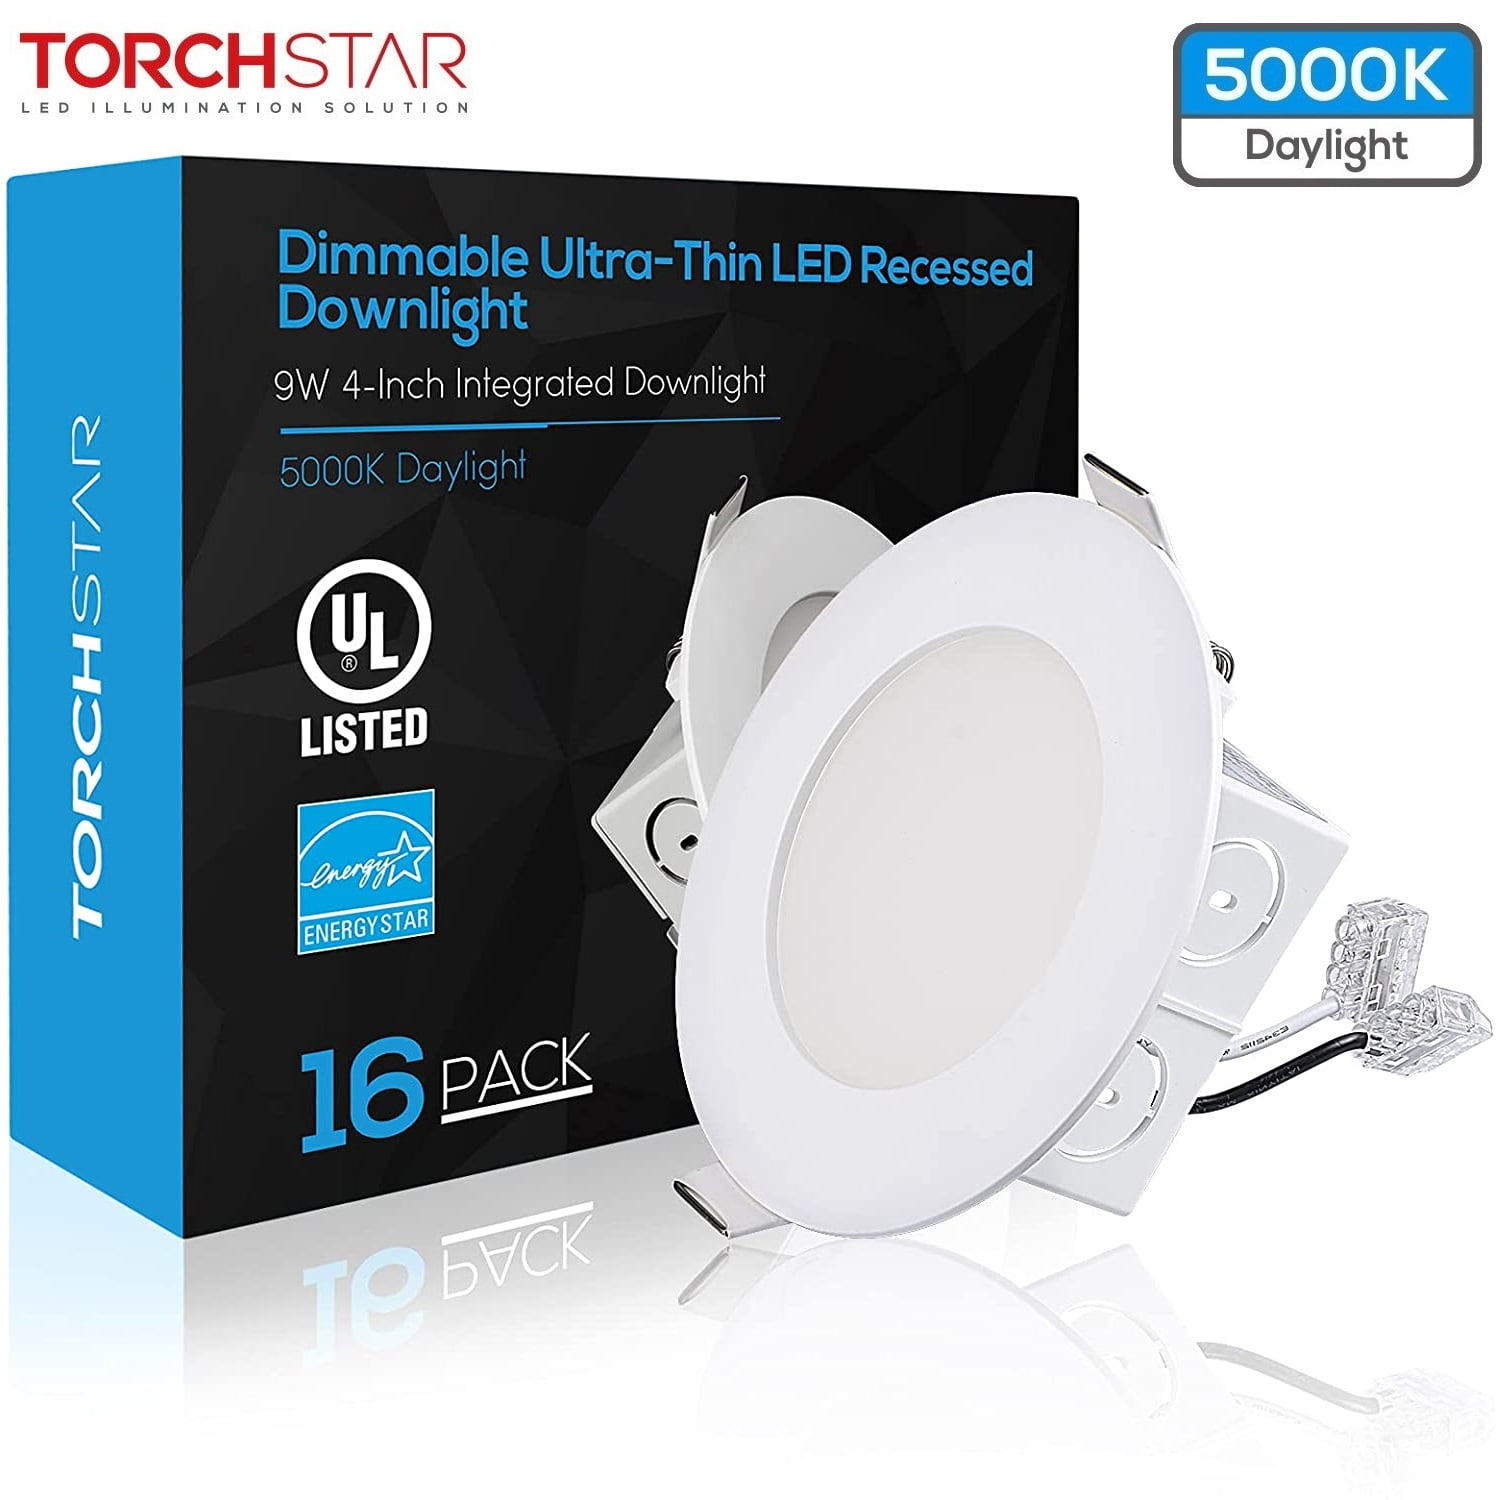 TORCHSTAR 16 Pack Ultra-Thin Inch Recessed LED Downlight with J-Box,  Dimmable Integrated Retrofit, Energy Star  UL certified, 5000K Daylight 